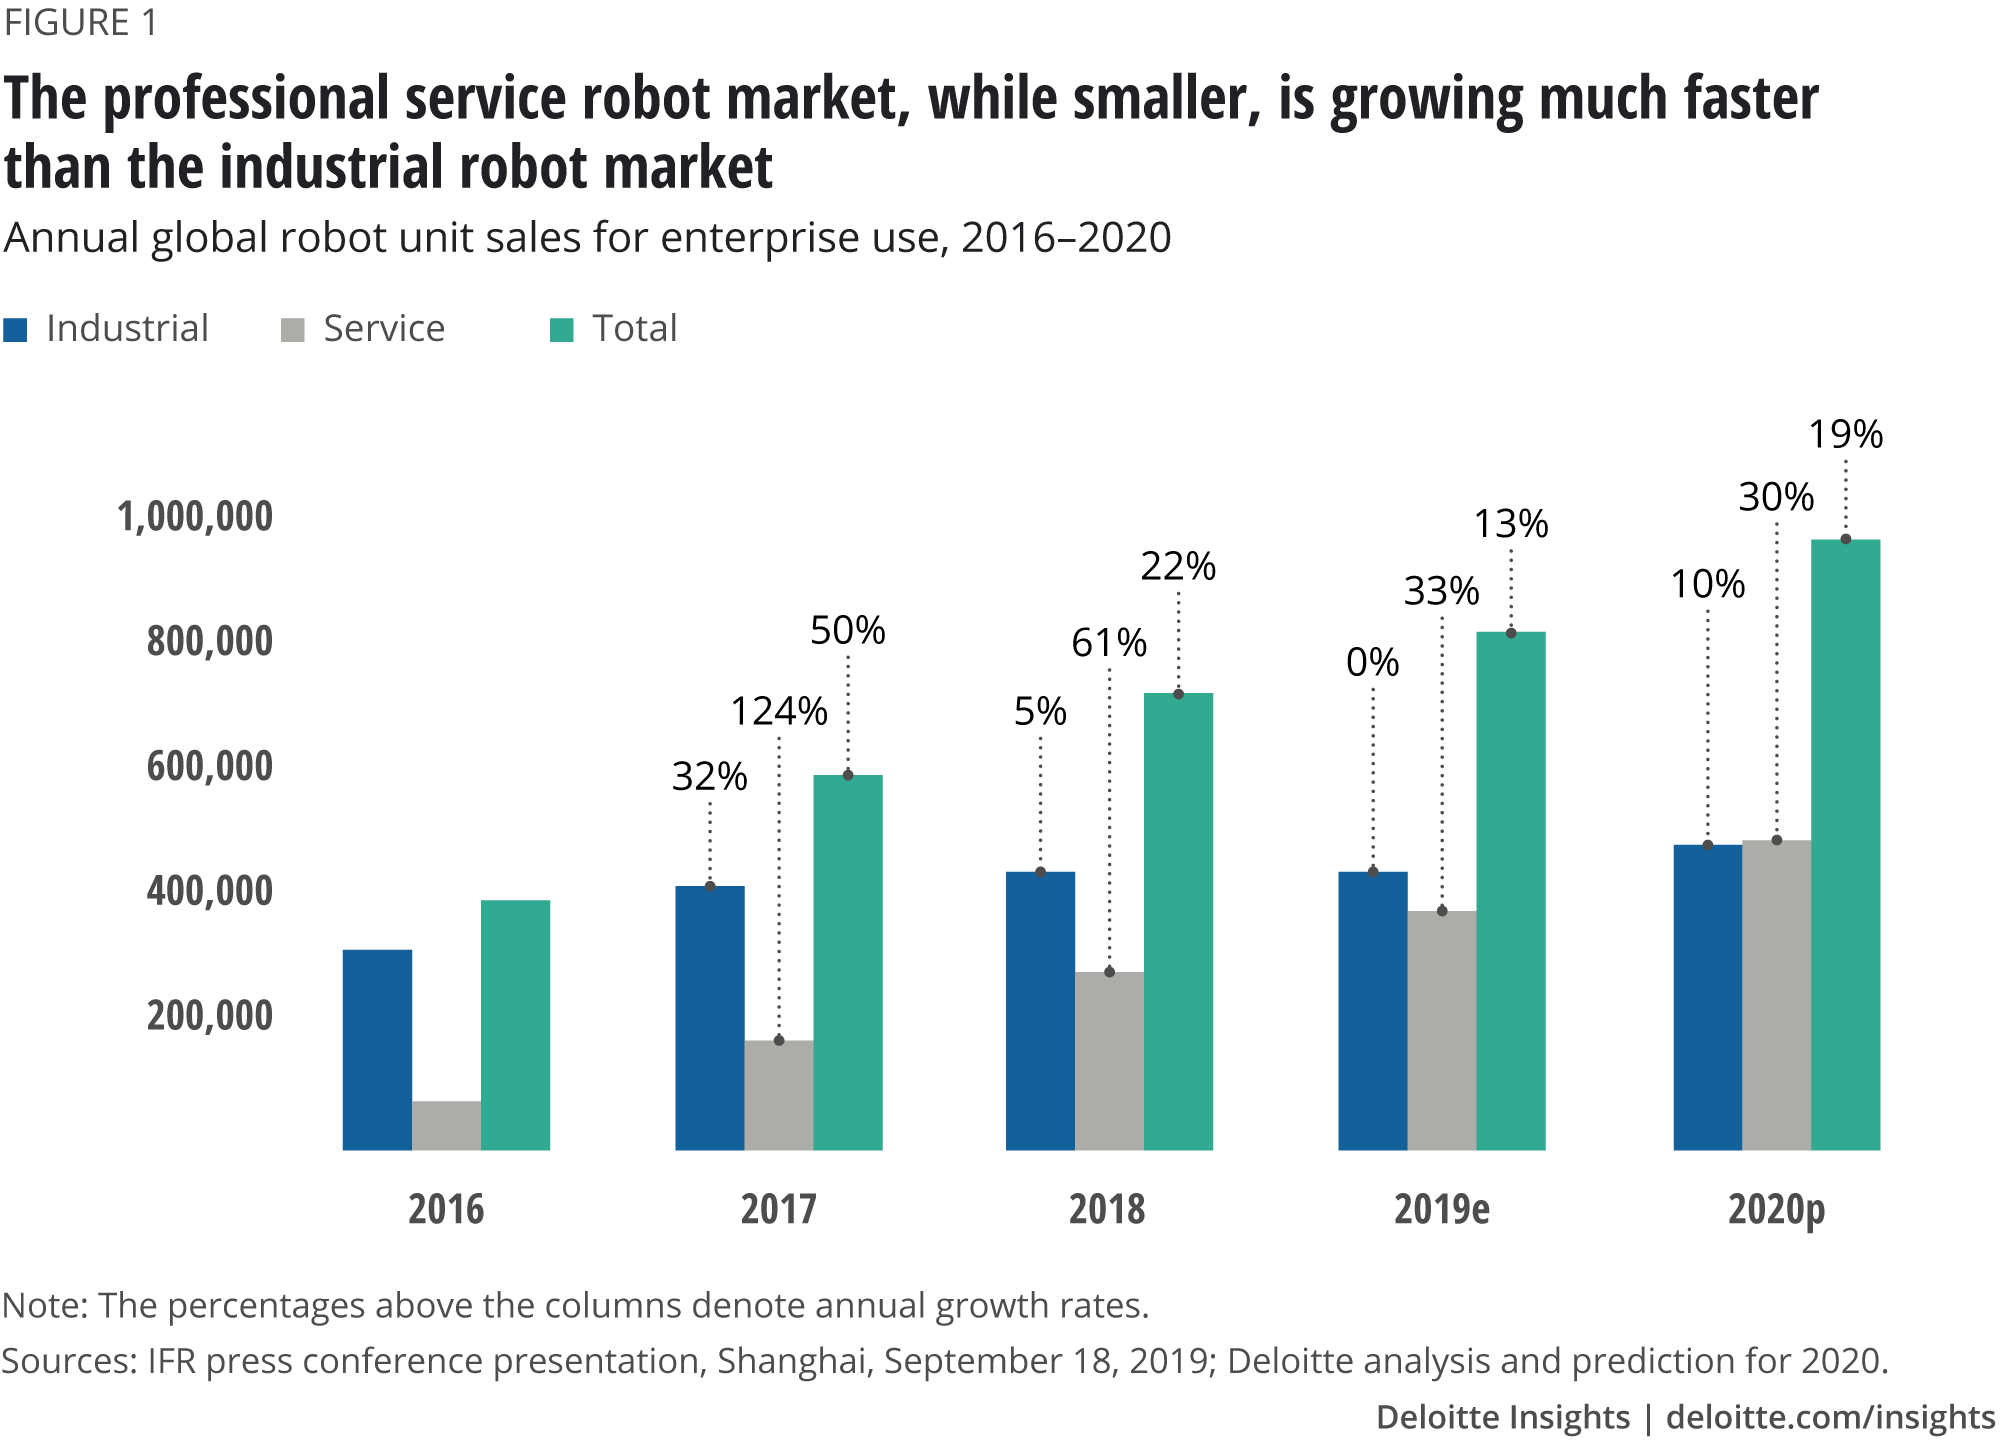 The professional service robot market, while smaller, is growing much faster than the industrial robot market